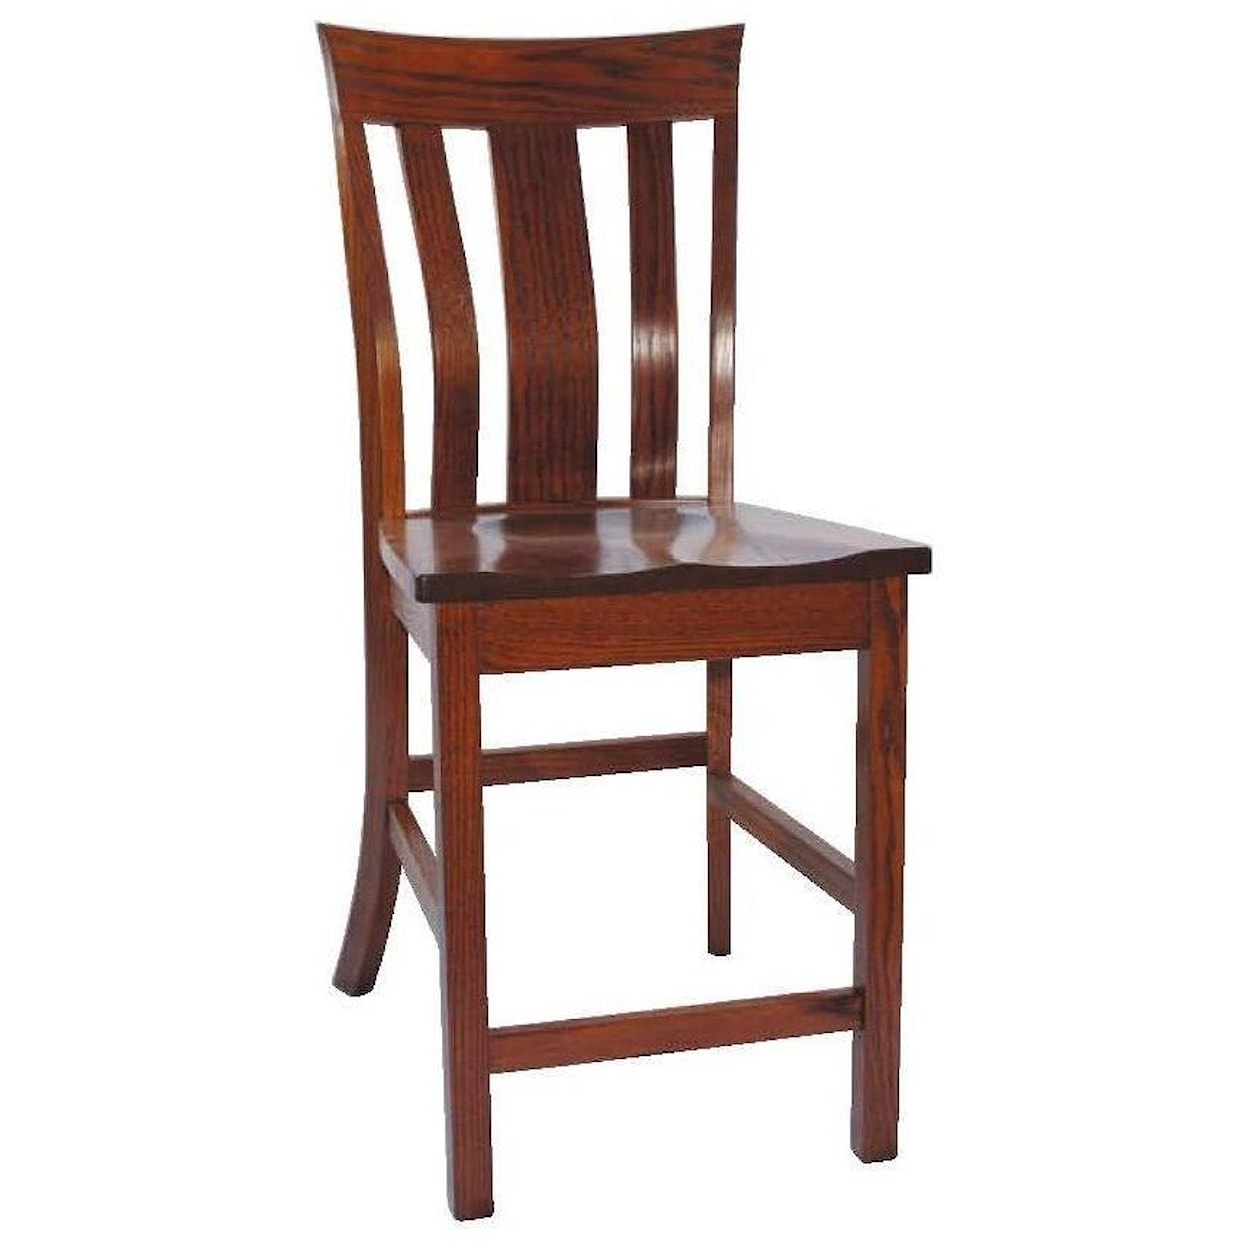 Country Comfort Woodworking McZena 30" Stationary Stool